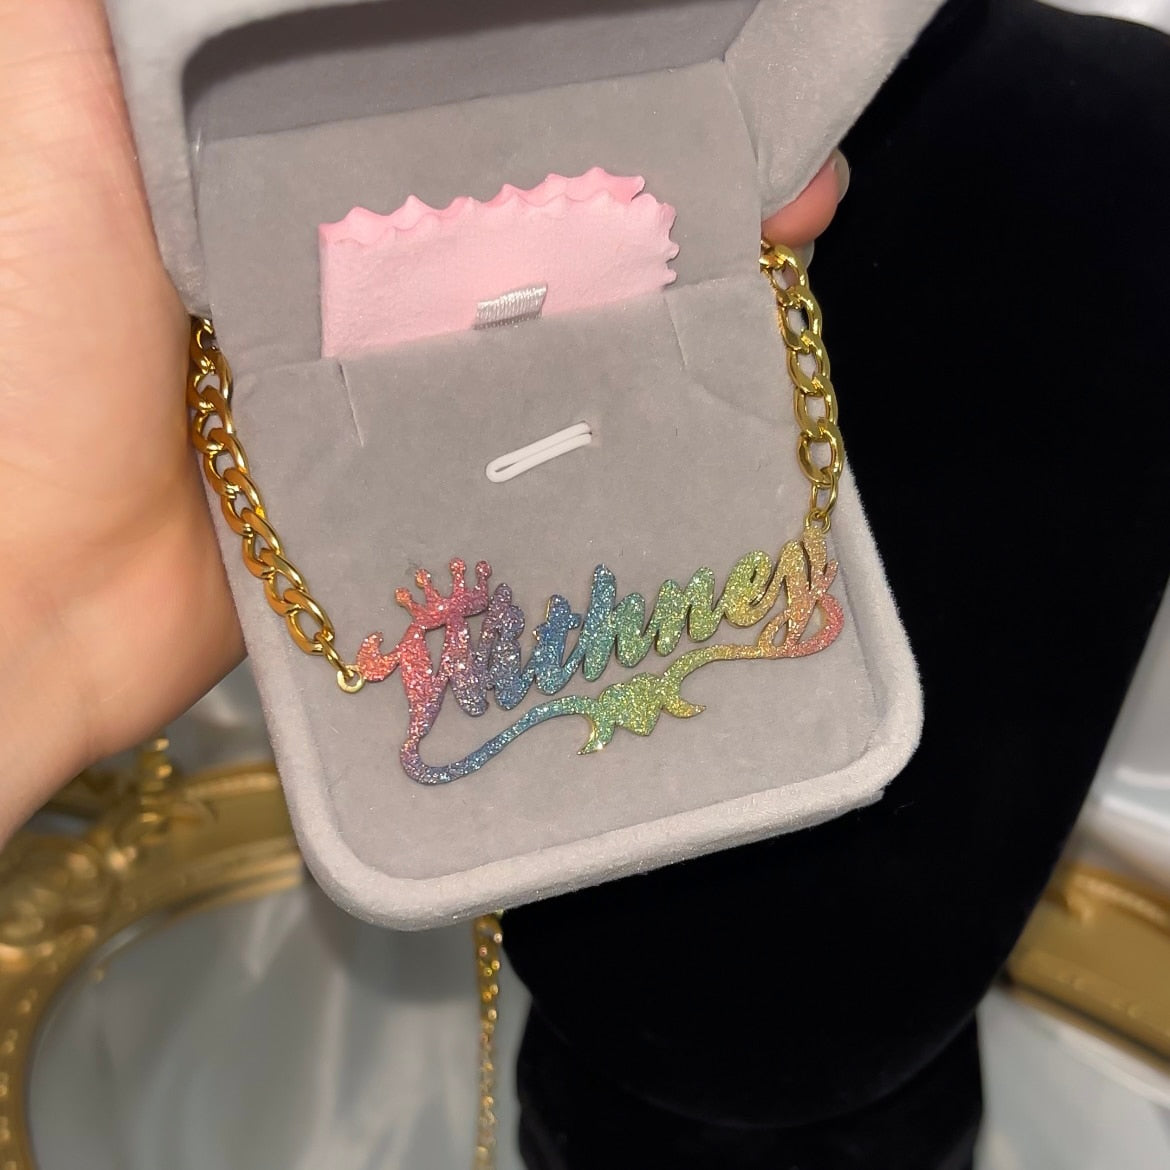 Glaceelaine Rainbow Personalized Name Necklace add your name